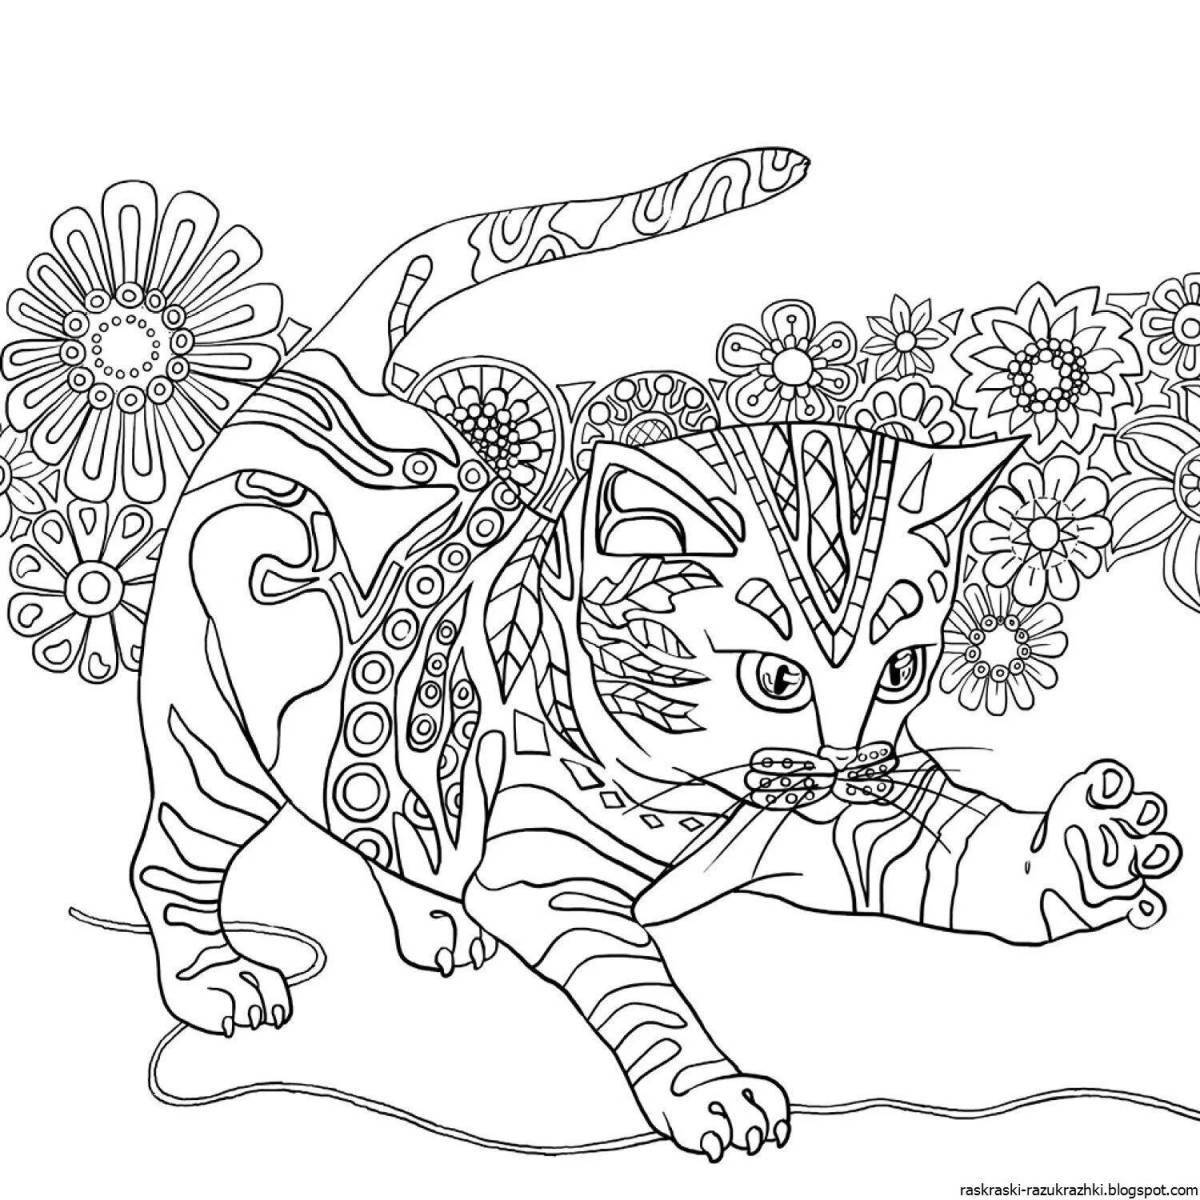 Creative anti-stress coloring book for 7-8 year olds